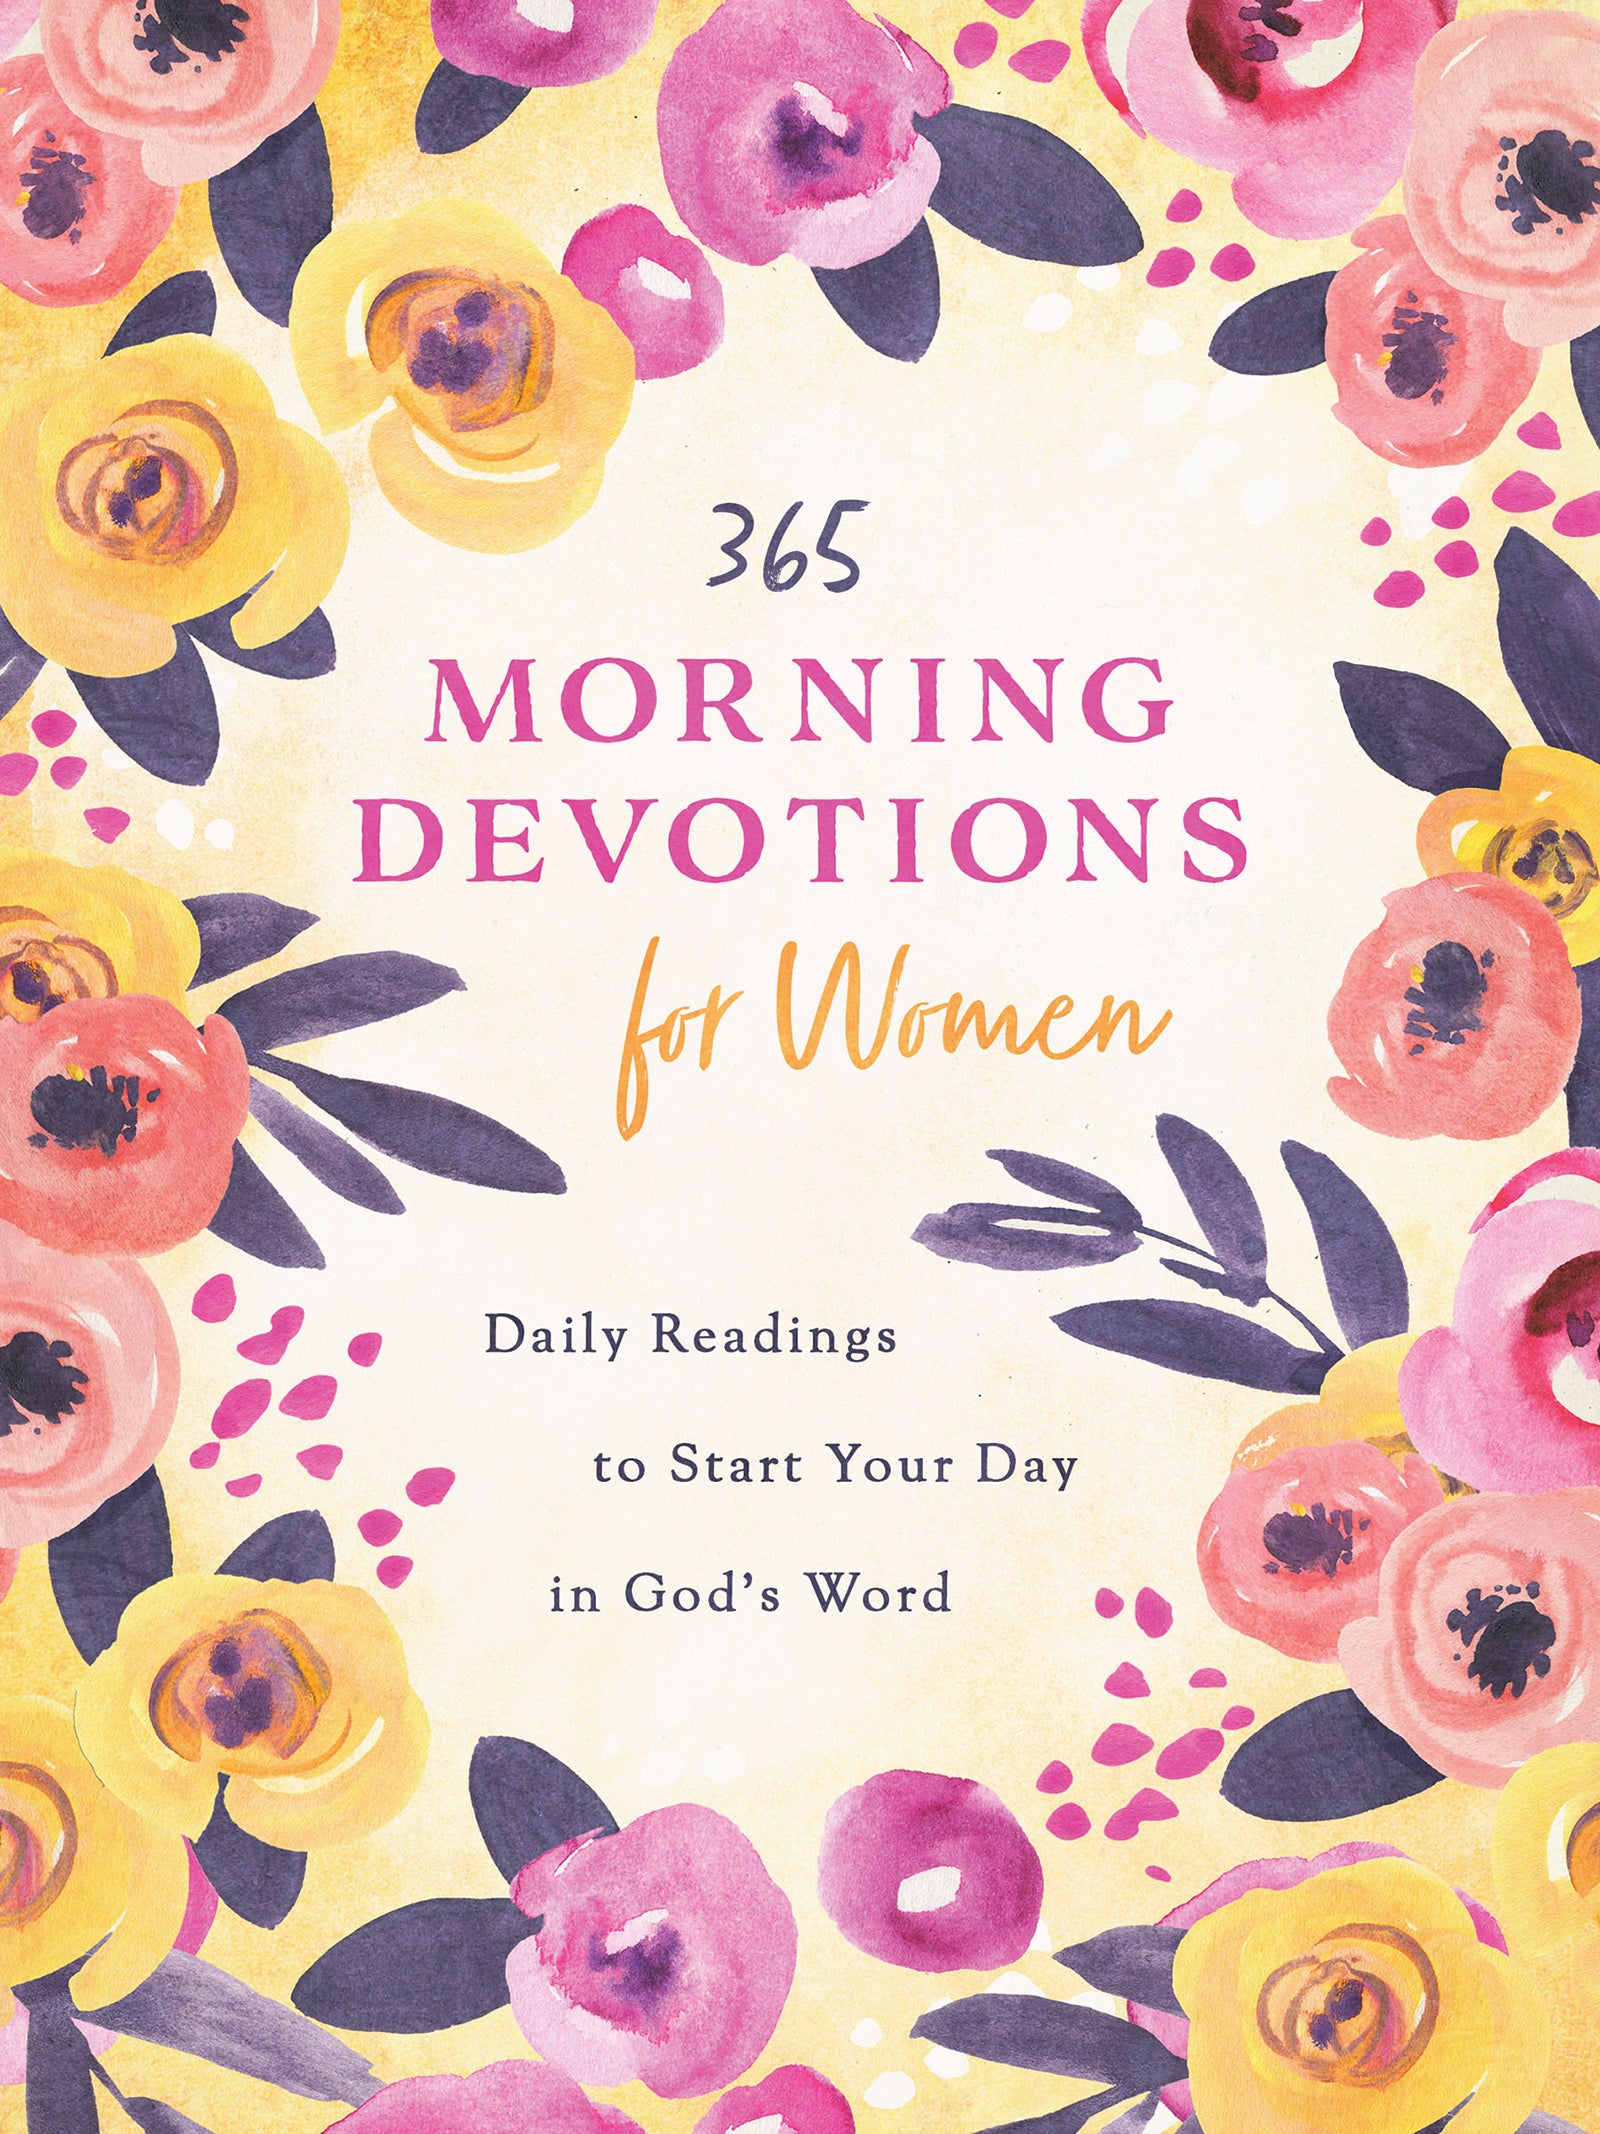 365 Morning Devotions for Women - The Christian Gift Company